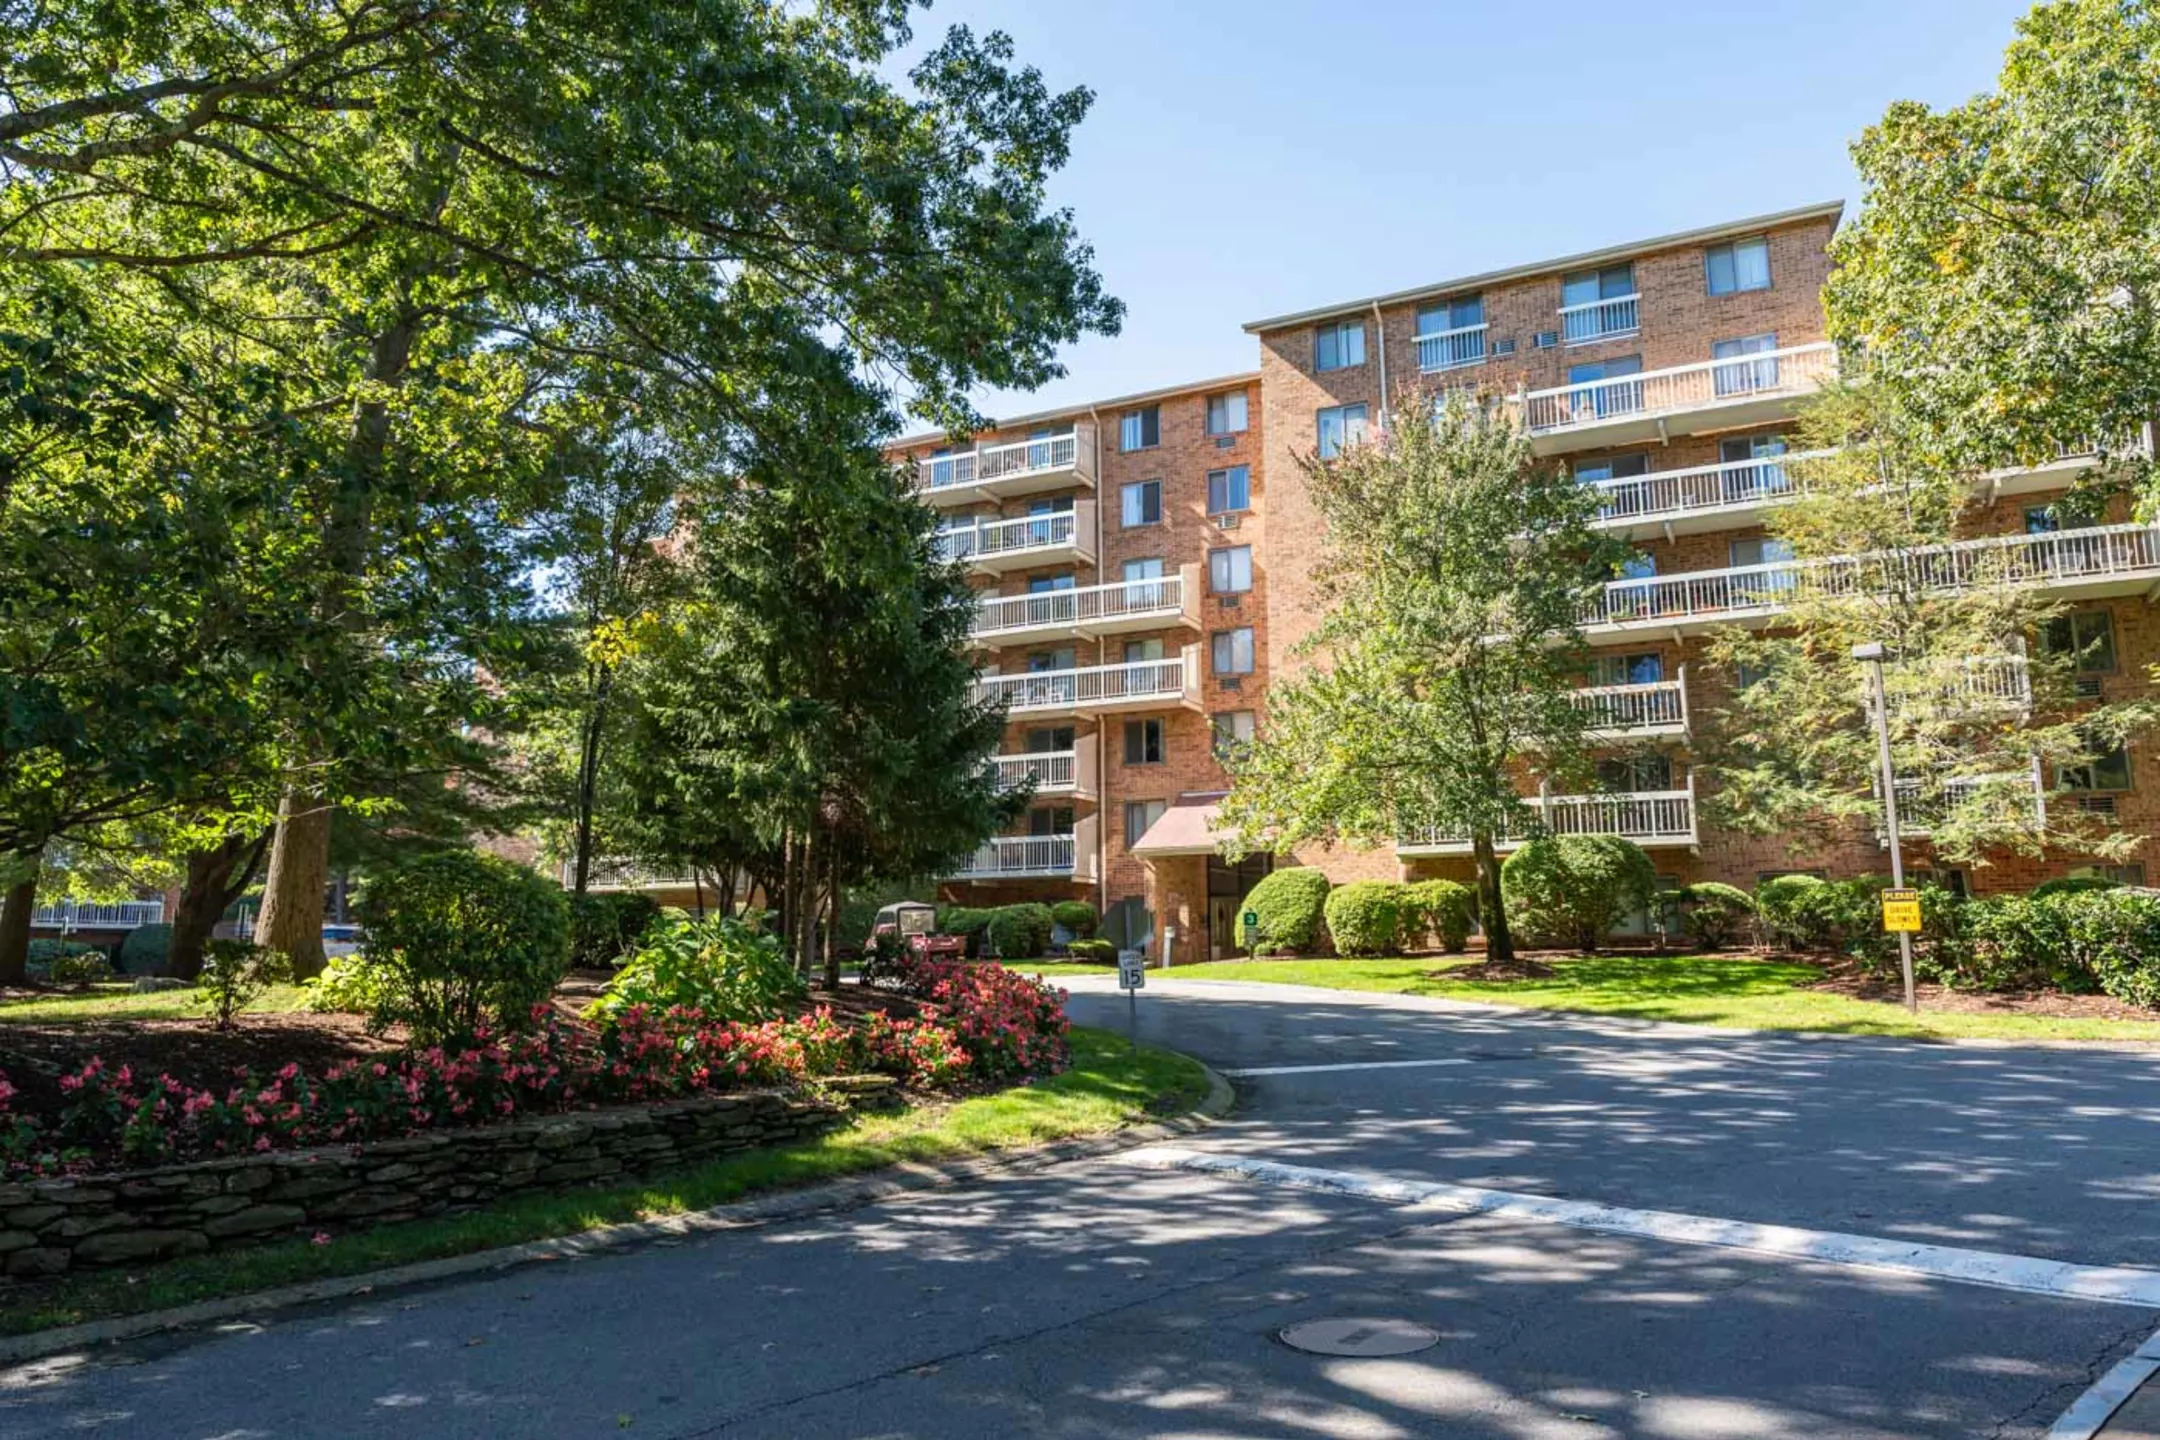 Building - Kimball Court Apartments - Woburn, MA